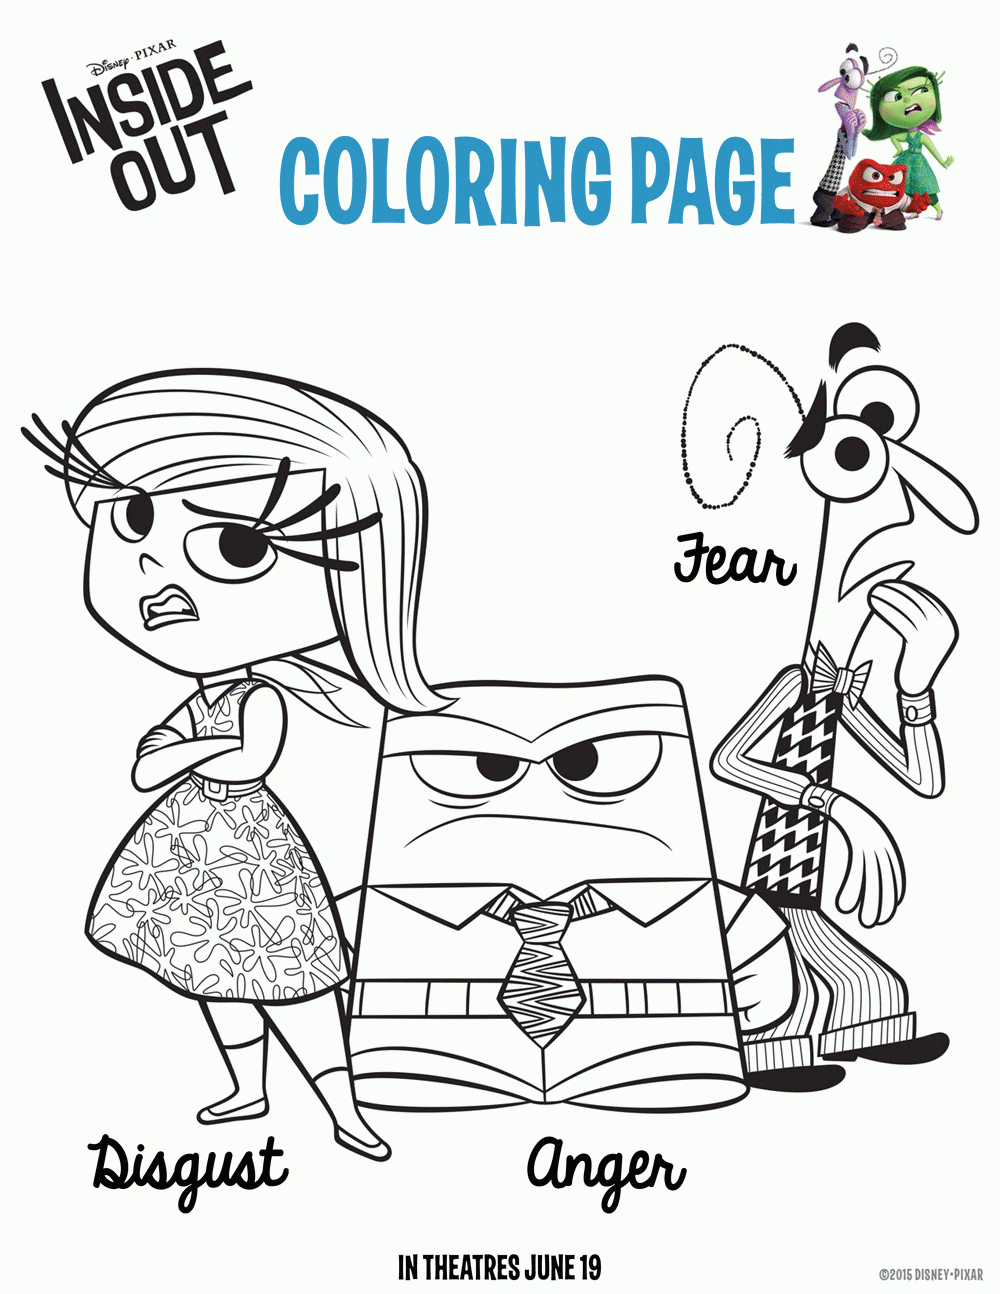 Disney's Inside Out Trailer + Coloring Pages